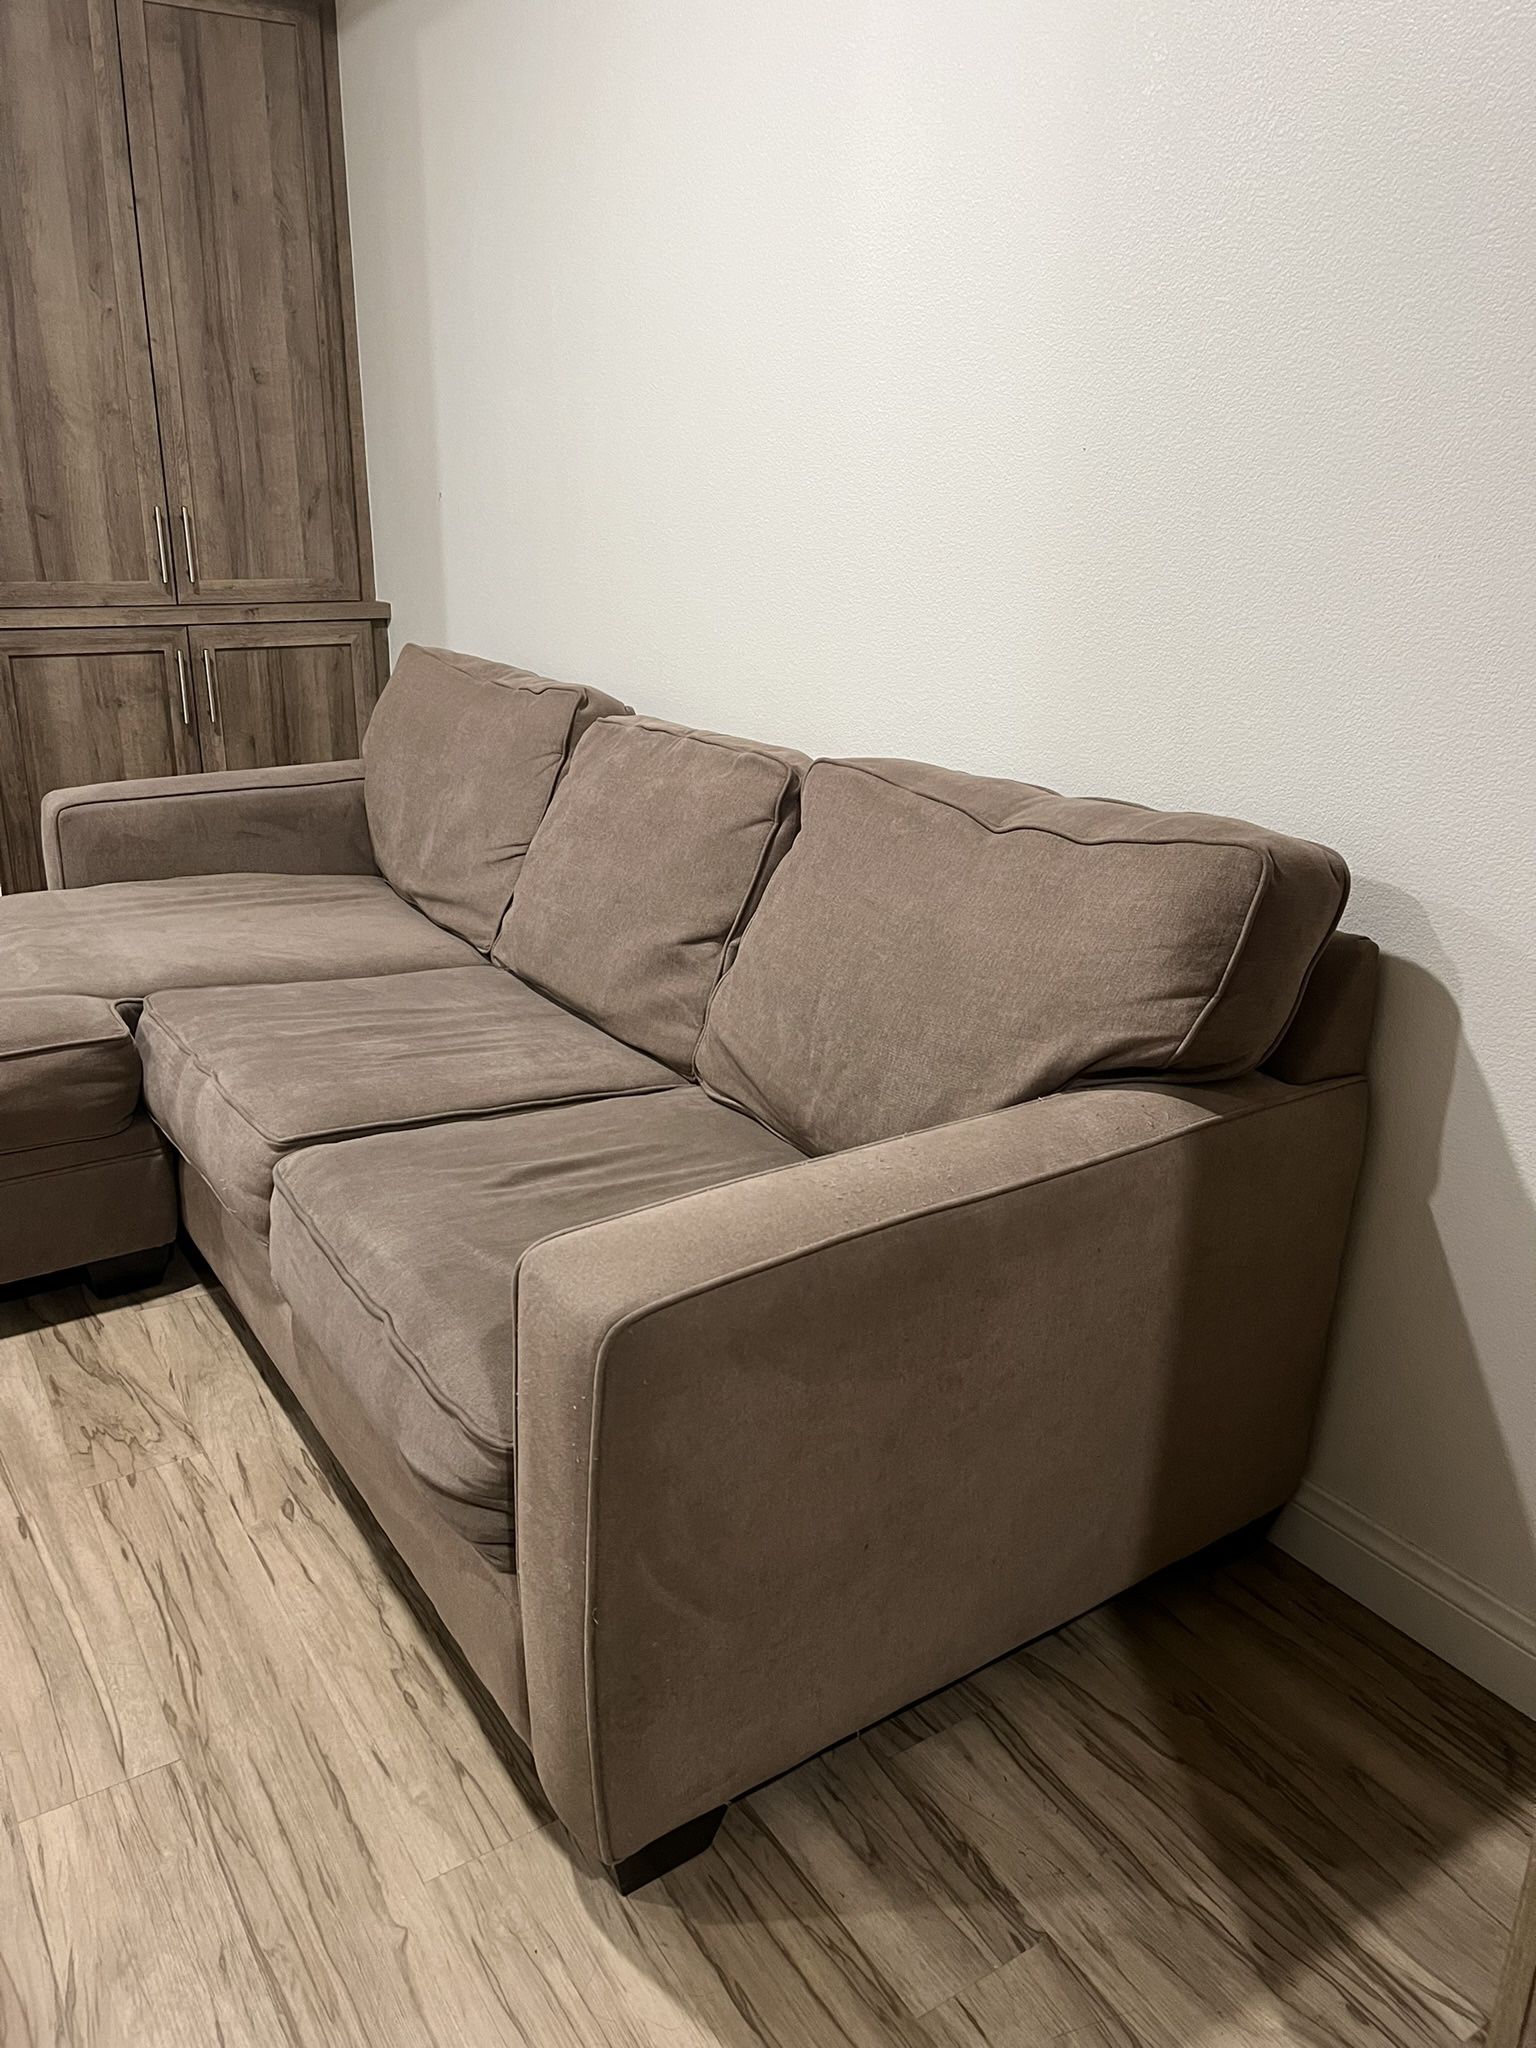 TAN FREE COUCH 